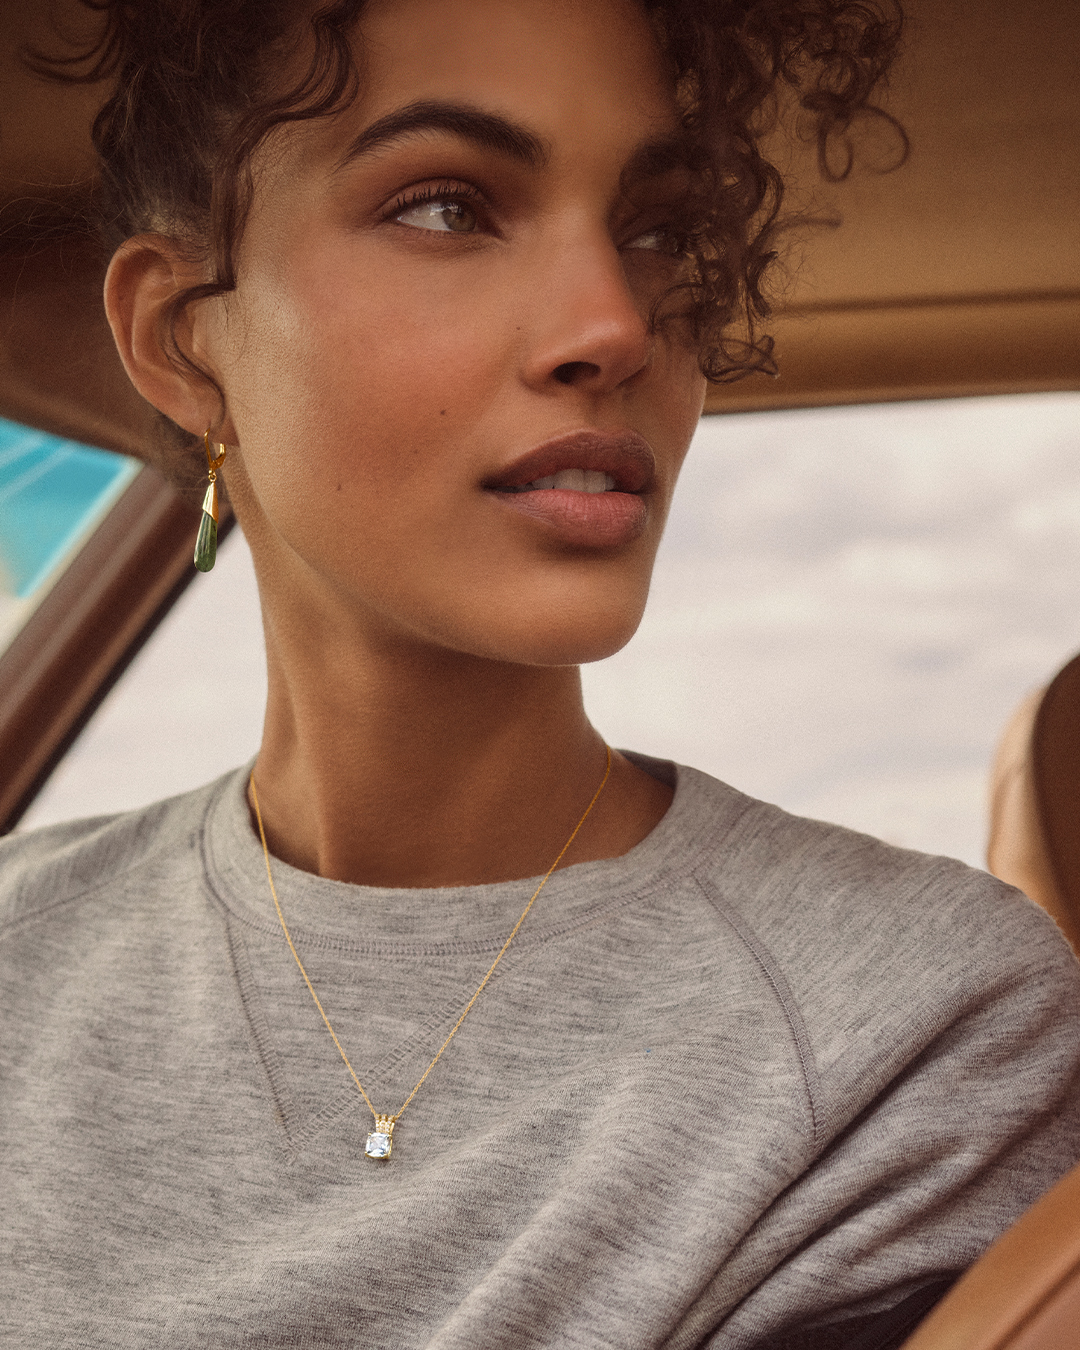 A woman sits in a car and looks off to the distance while showcasing earrings and a necklace from Peoples Jewellers.